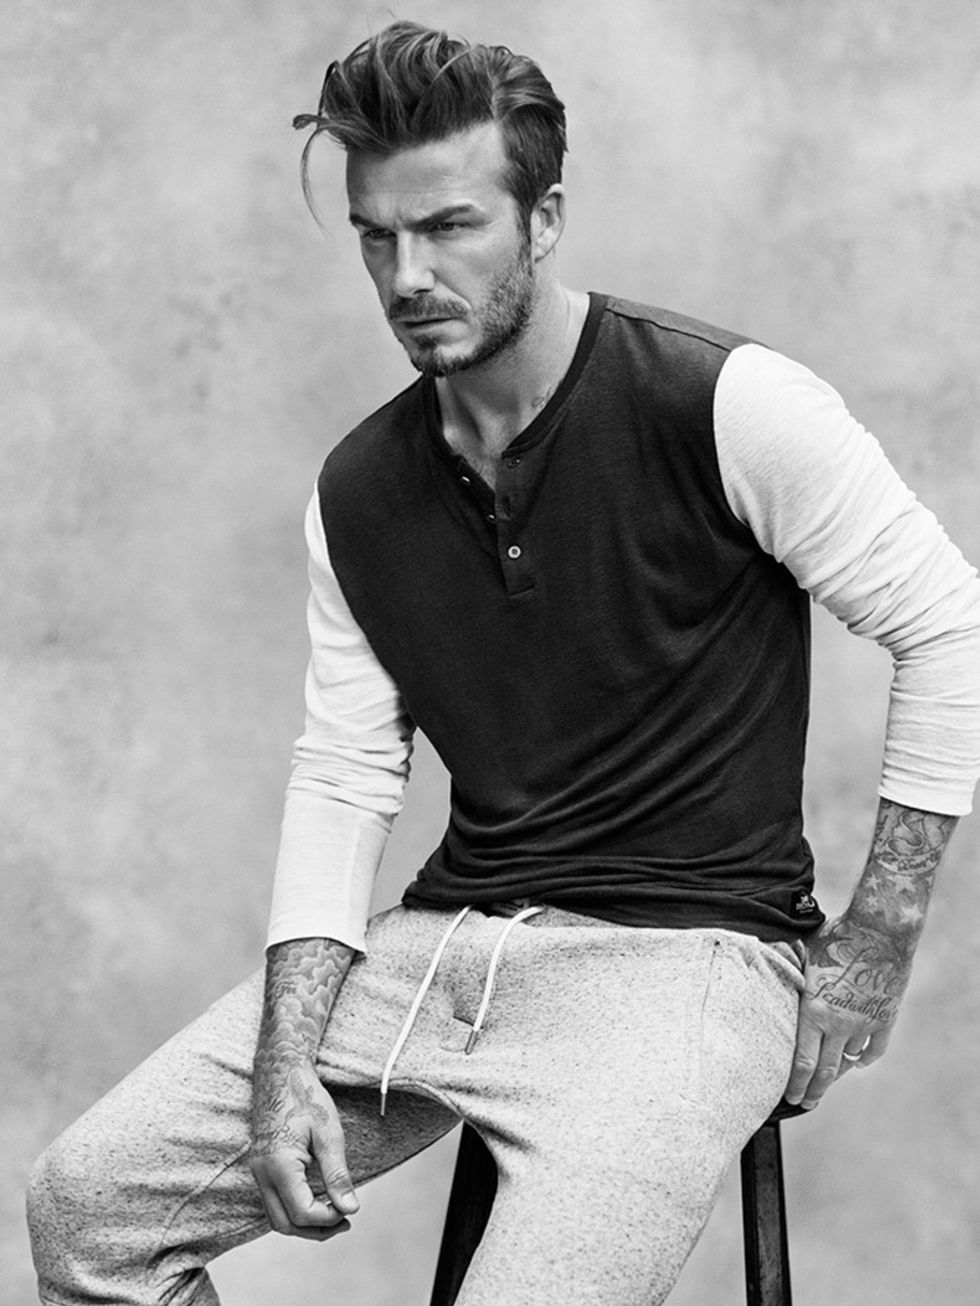 David Beckham in the 'Modern Essentials selected by David Beckham' Campaign, March 2015.